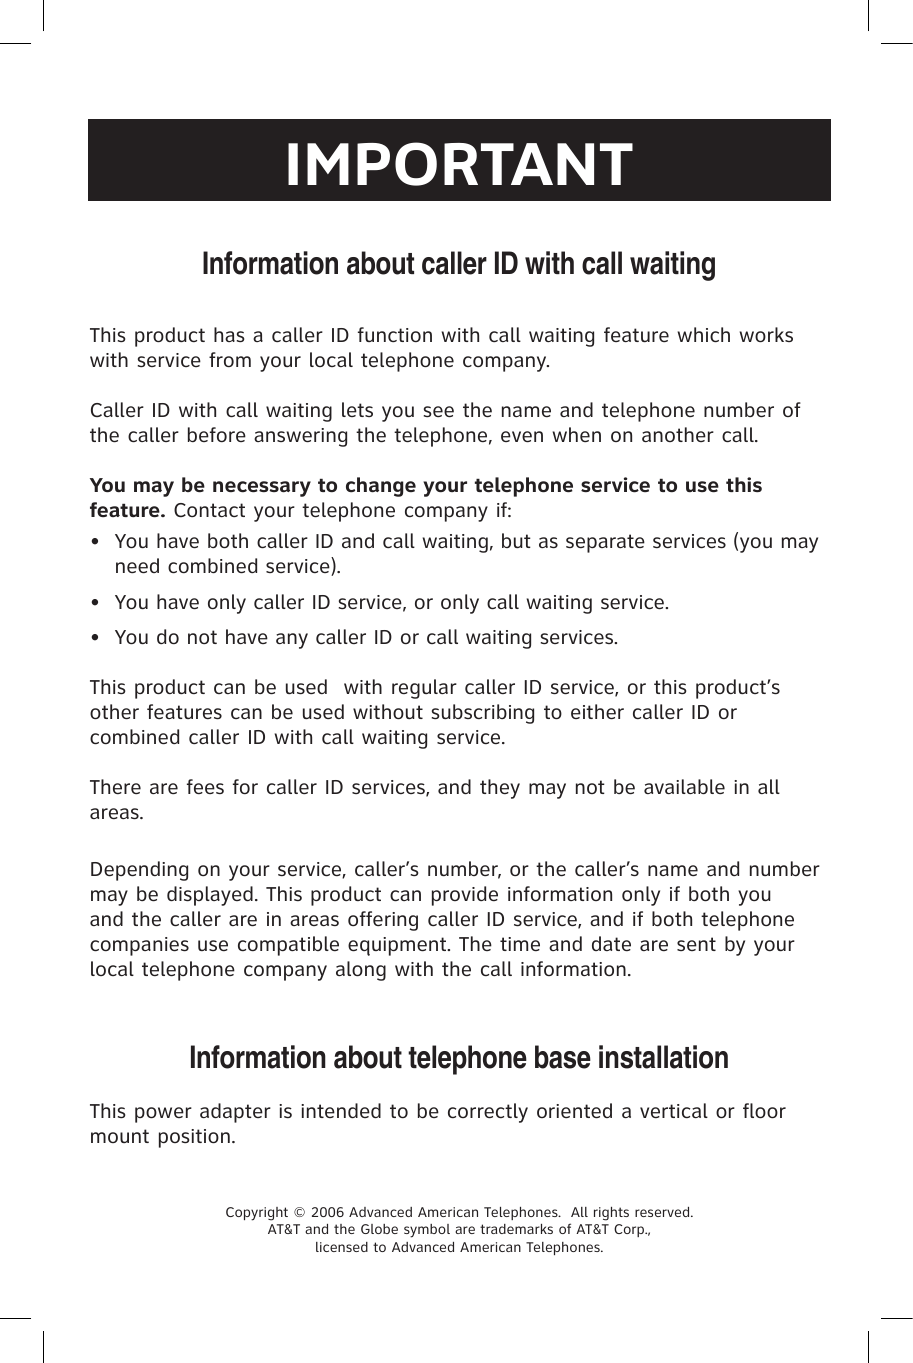 Depending on your service, caller’s number, or the caller’s name and number may be displayed. This product can provide information only if both you and the caller are in areas offering caller ID service, and if both telephone companies use compatible equipment. The time and date are sent by your local telephone company along with the call information.Information about telephone base installationThis power adapter is intended to be correctly oriented a vertical or floor mount position.Information about caller ID with call waitingCopyright © 2006 Advanced American Telephones.  All rights reserved.  AT&amp;T and the Globe symbol are trademarks of AT&amp;T Corp.,  licensed to Advanced American Telephones.This product has a caller ID function with call waiting feature which works with service from your local telephone company.  Caller ID with call waiting lets you see the name and telephone number of the caller before answering the telephone, even when on another call.You may be necessary to change your telephone service to use this feature. Contact your telephone company if:  •  You have both caller ID and call waiting, but as separate services (you may need combined service).•  You have only caller ID service, or only call waiting service.•  You do not have any caller ID or call waiting services.  This product can be used  with regular caller ID service, or this product’s other features can be used without subscribing to either caller ID or combined caller ID with call waiting service.There are fees for caller ID services, and they may not be available in all areas.IMPORTANT